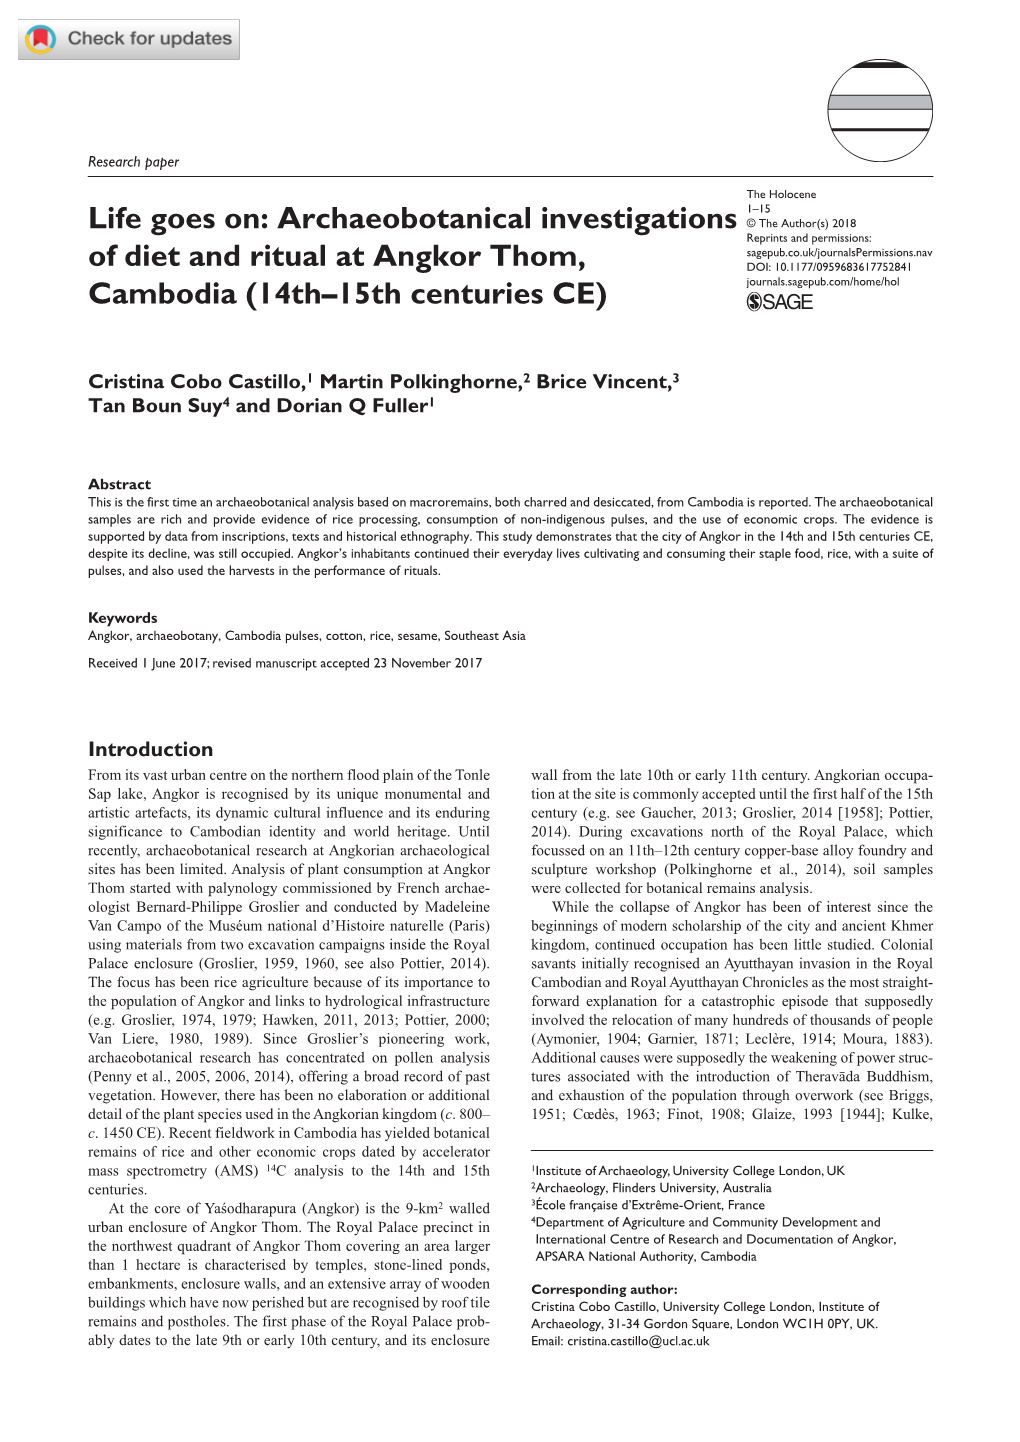 Archaeobotanical Investigations of Diet and Ritual at Angkor Thom